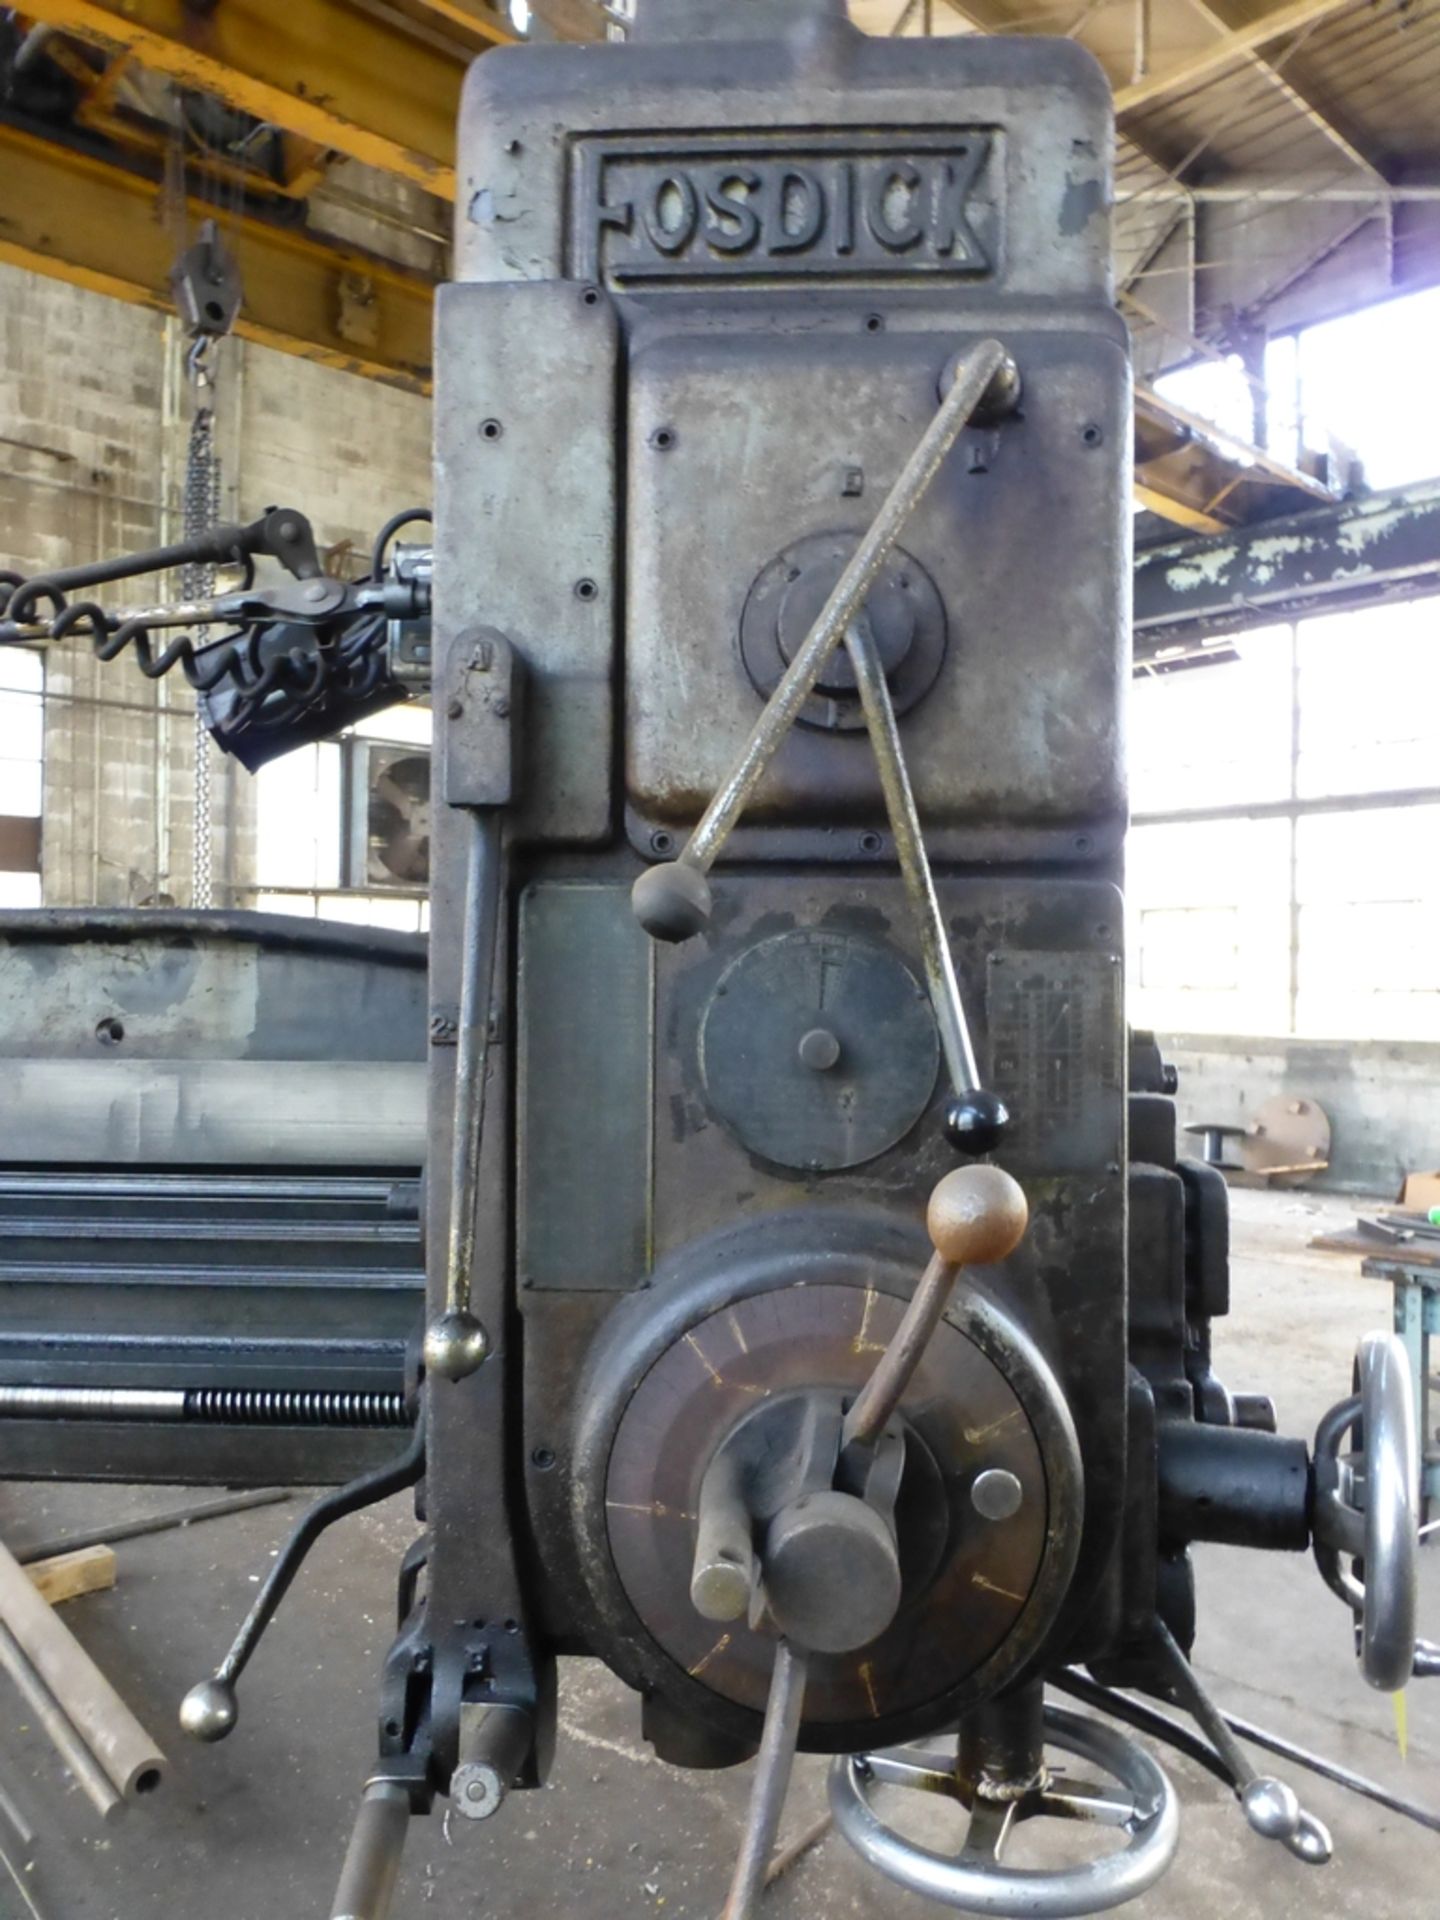 Fosdick 3' Radial Arm Drill|20-1,264 RPM - Image 4 of 12